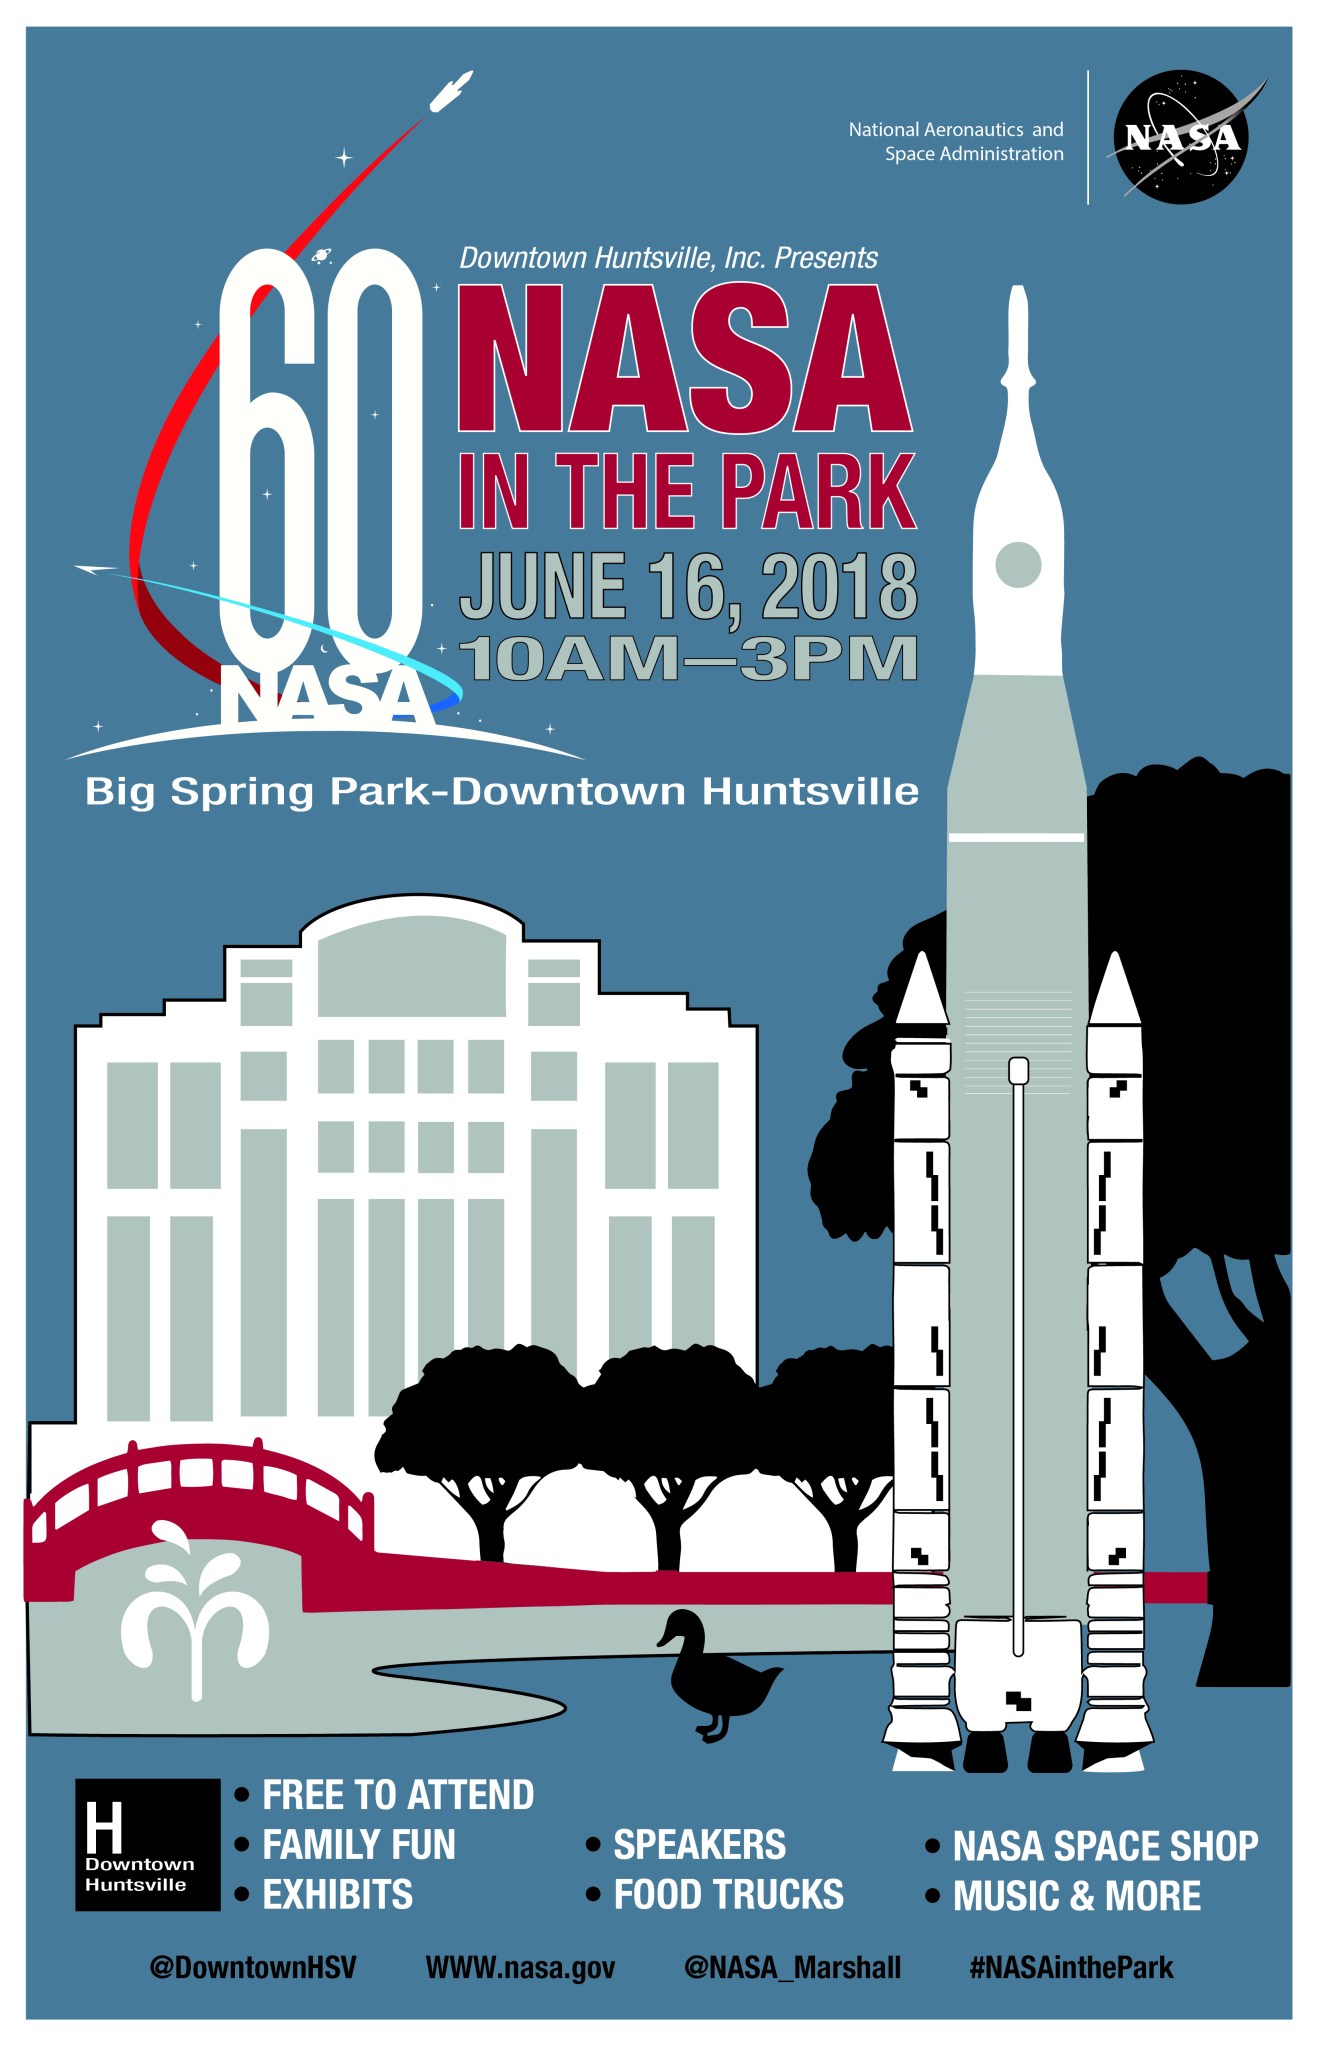 Marshall and Downtown Huntsville Inc. will host NASA in the Park Saturday, June 16, from 10 a.m. to 3 p.m. in Big Spring Park.